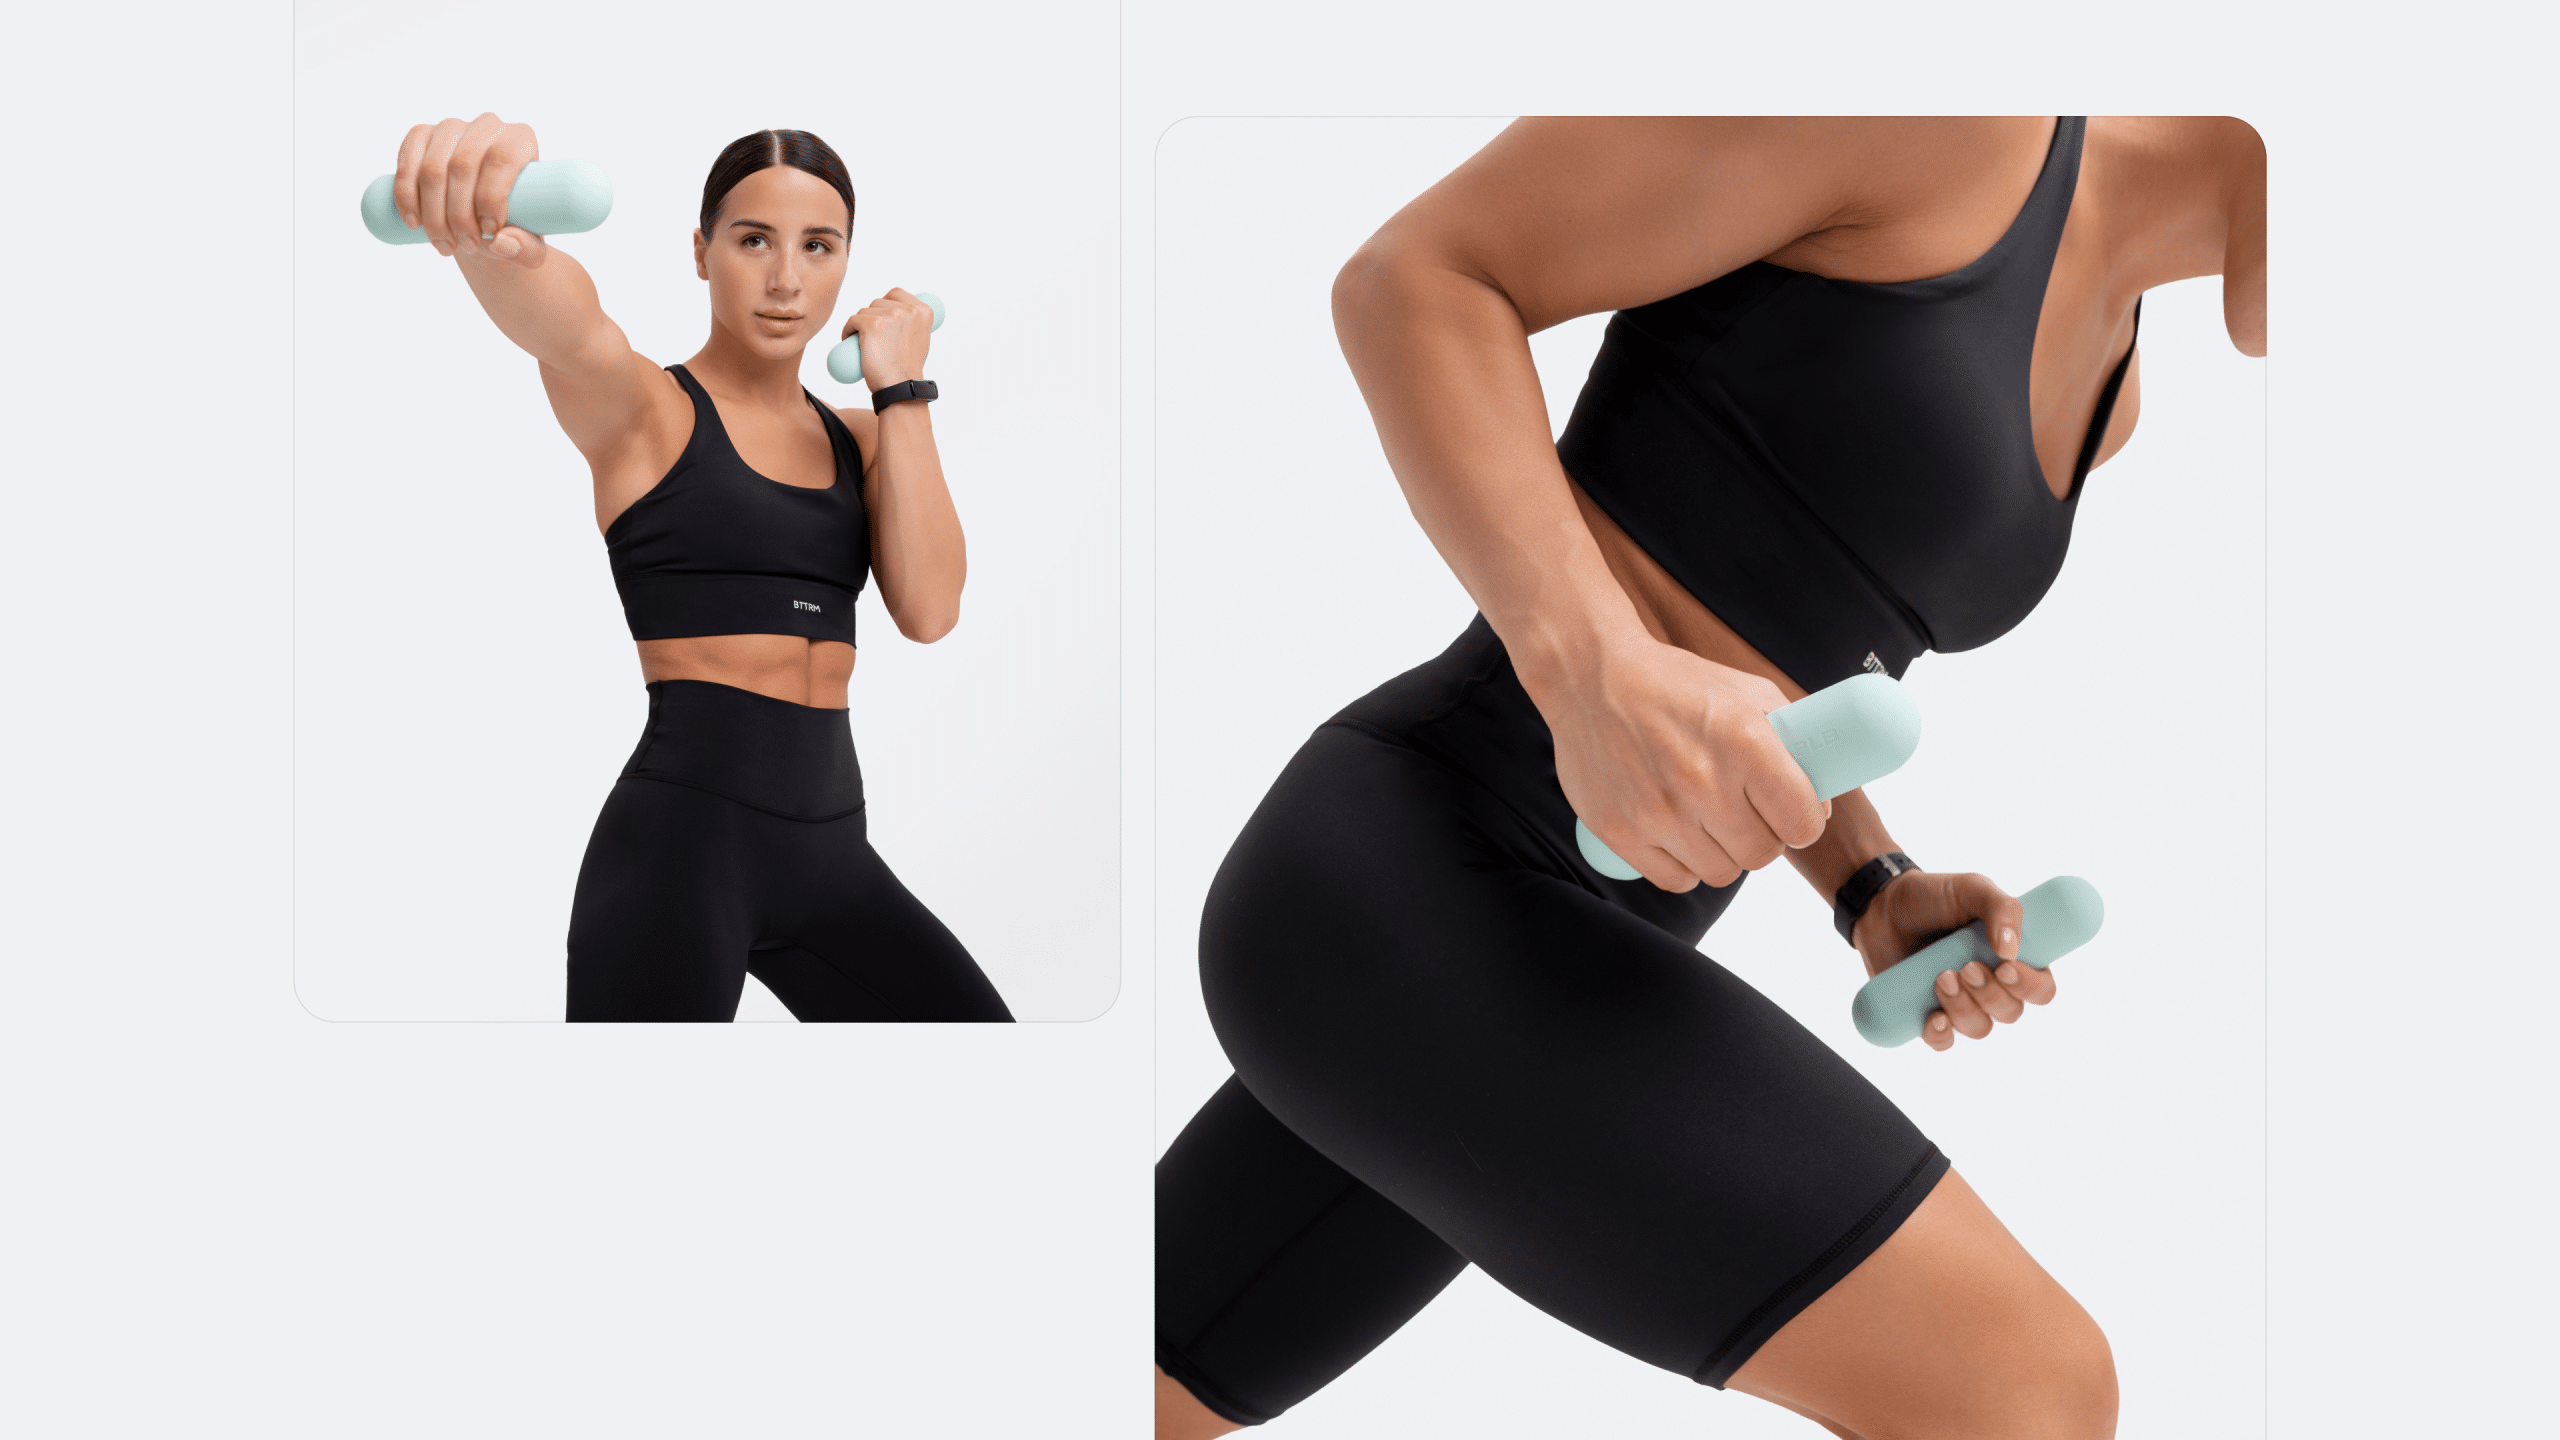 awesome Time for mom to get strong! Blast away that baby belly pooch with  these killer P